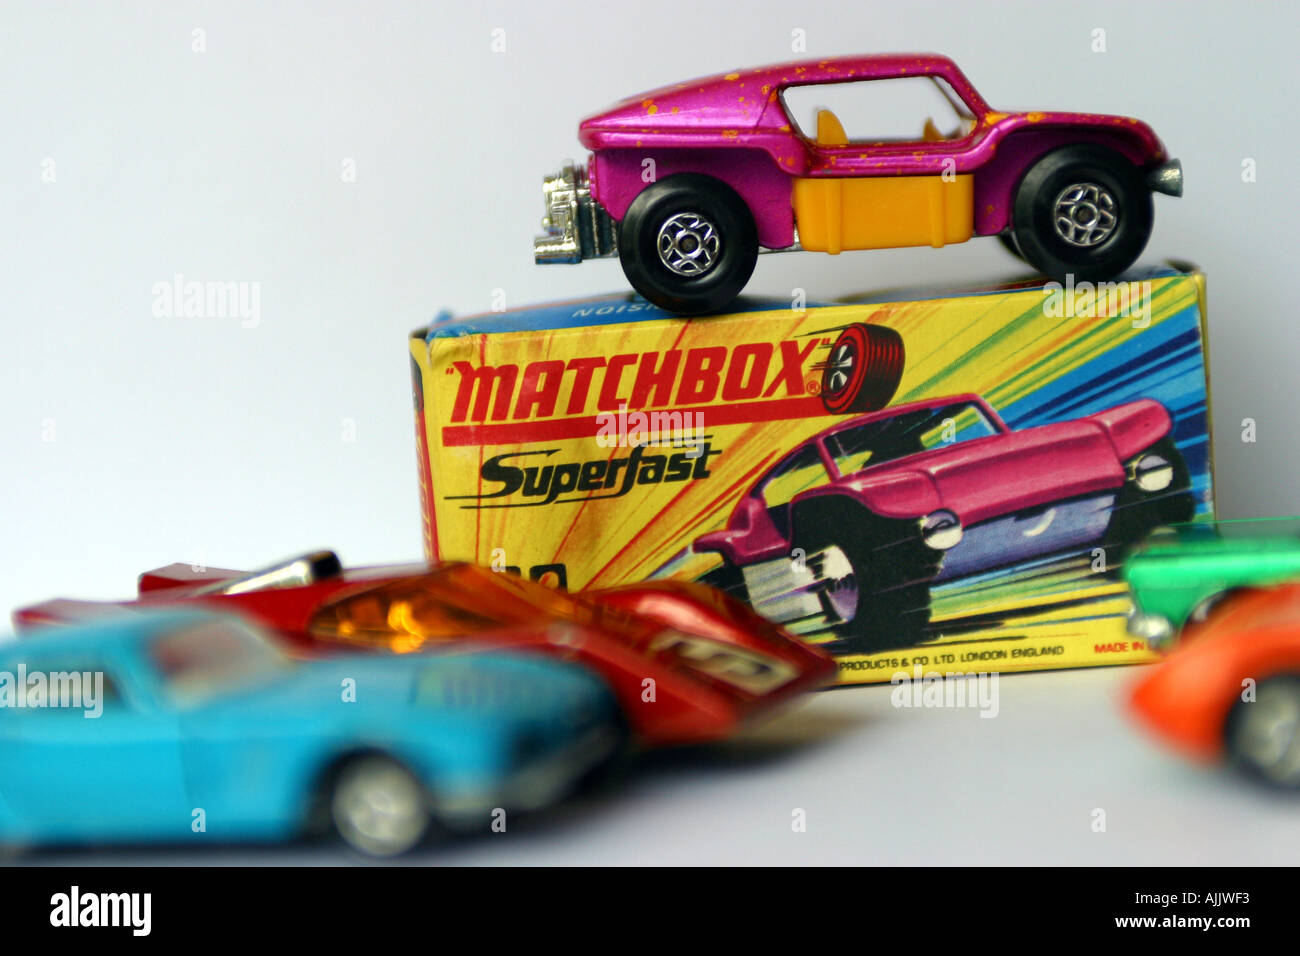 matchbox toy car with original packaging Stock Photo